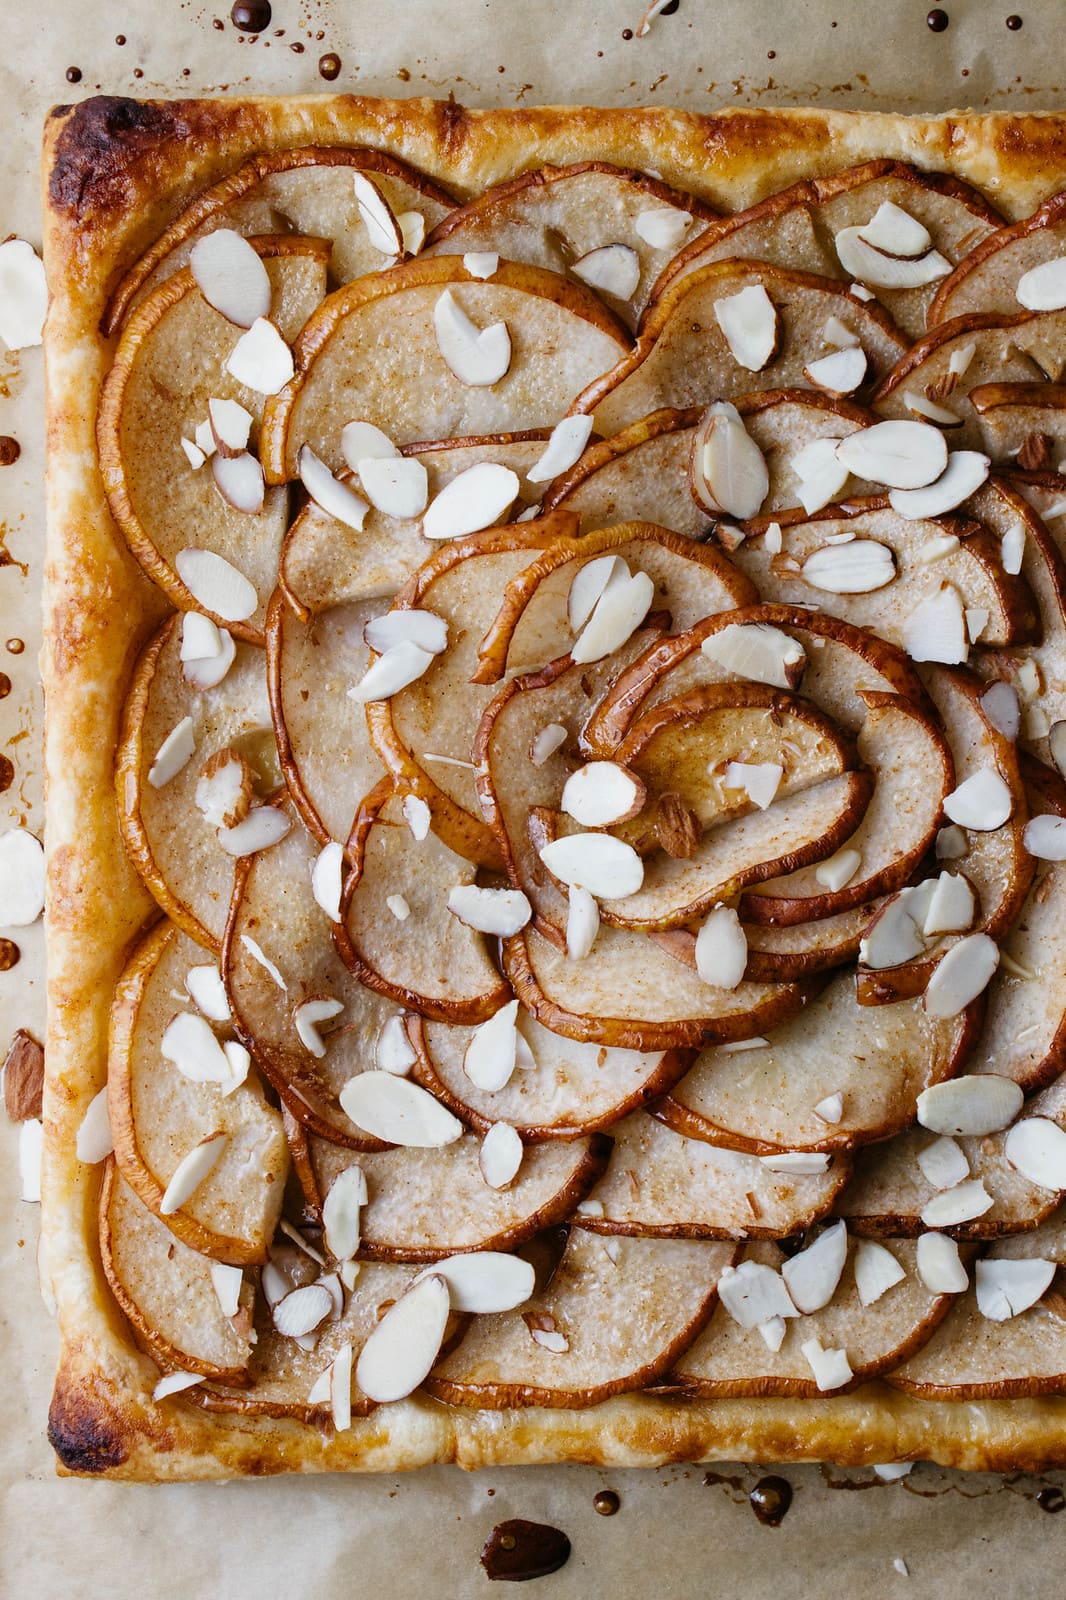 up close view of freshly made pear tart.